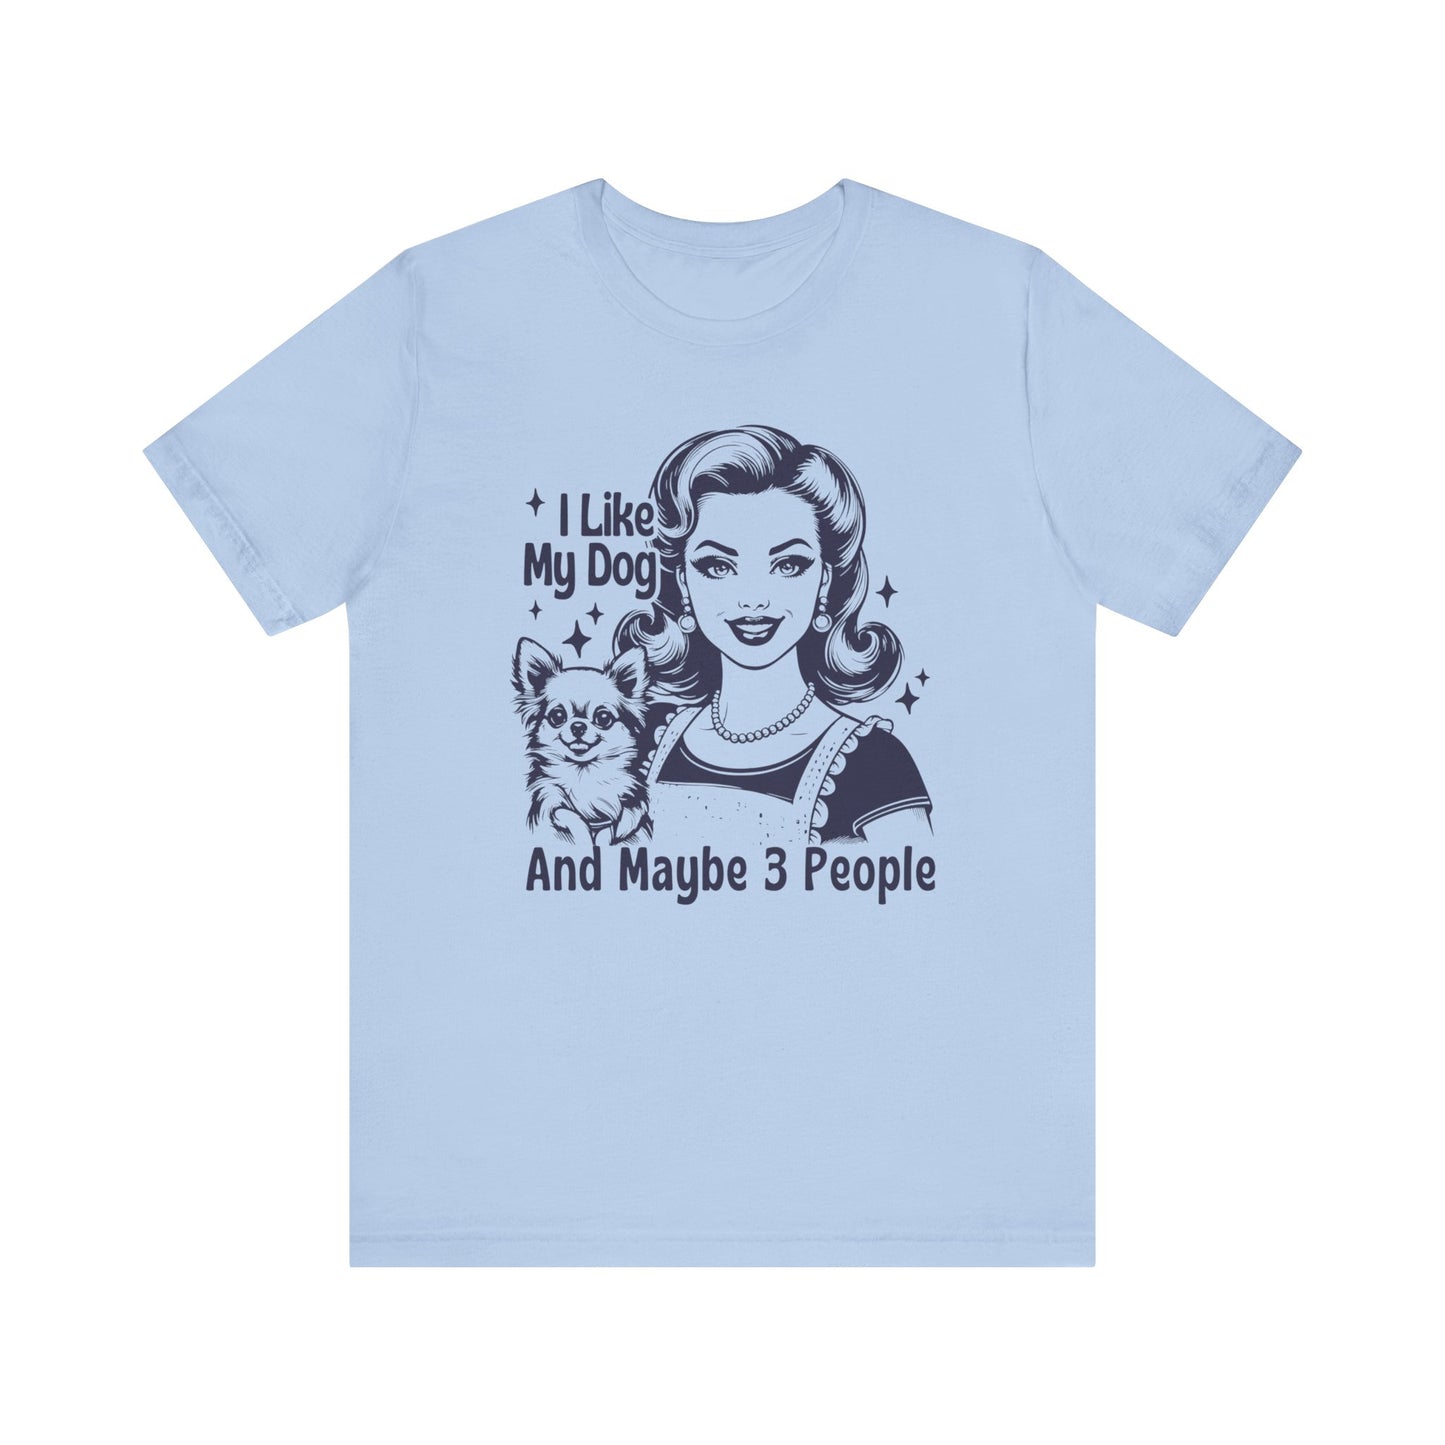 I Like My Dog And Maybe 3 People - T-Shirt